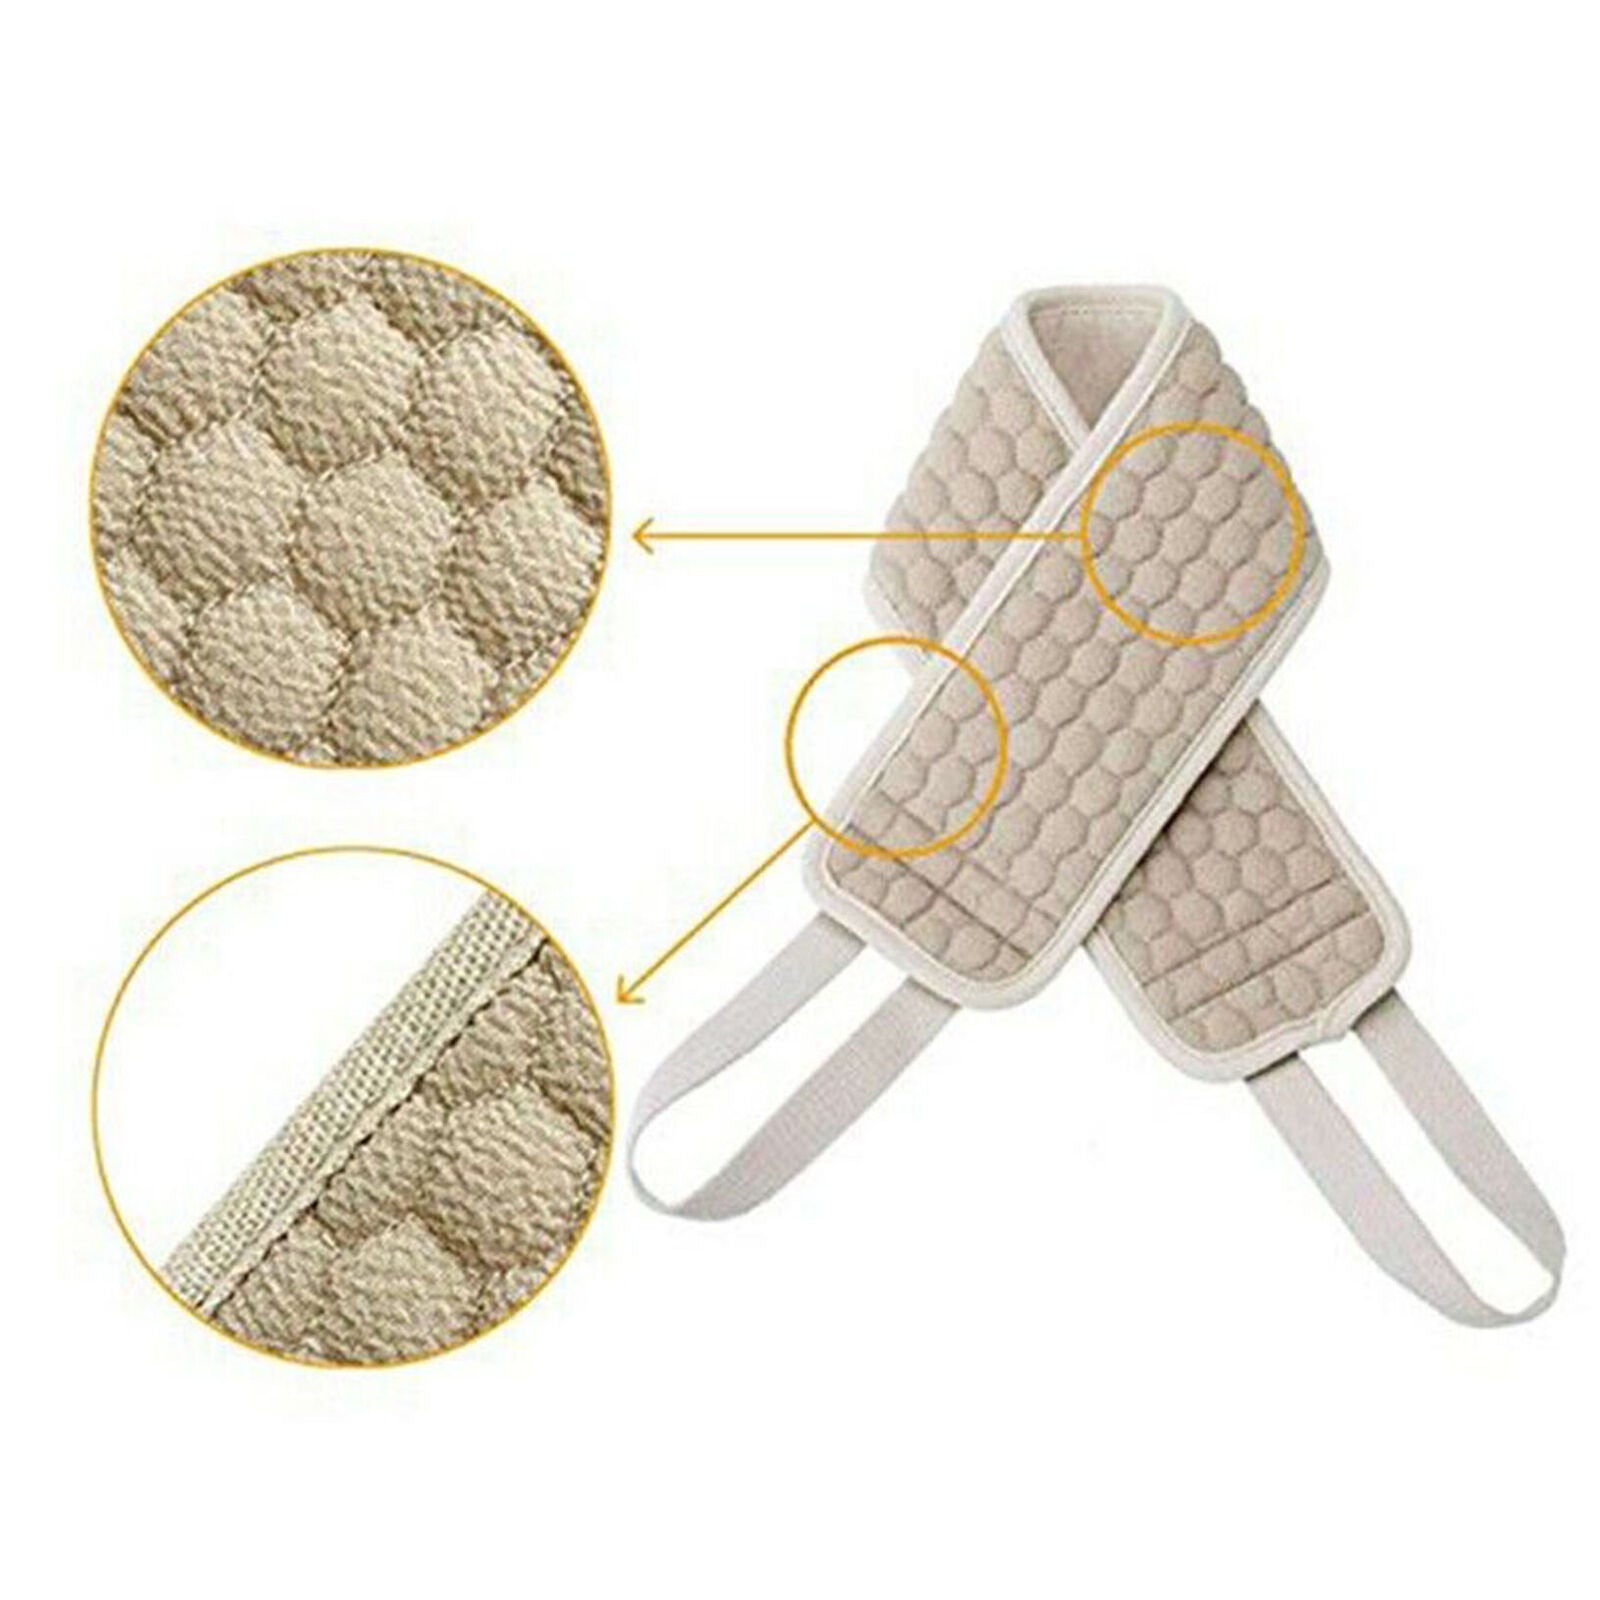 1 *Double Sided Back Strap Long Scrubber Bath Shower Spa Body Exfoliating Best